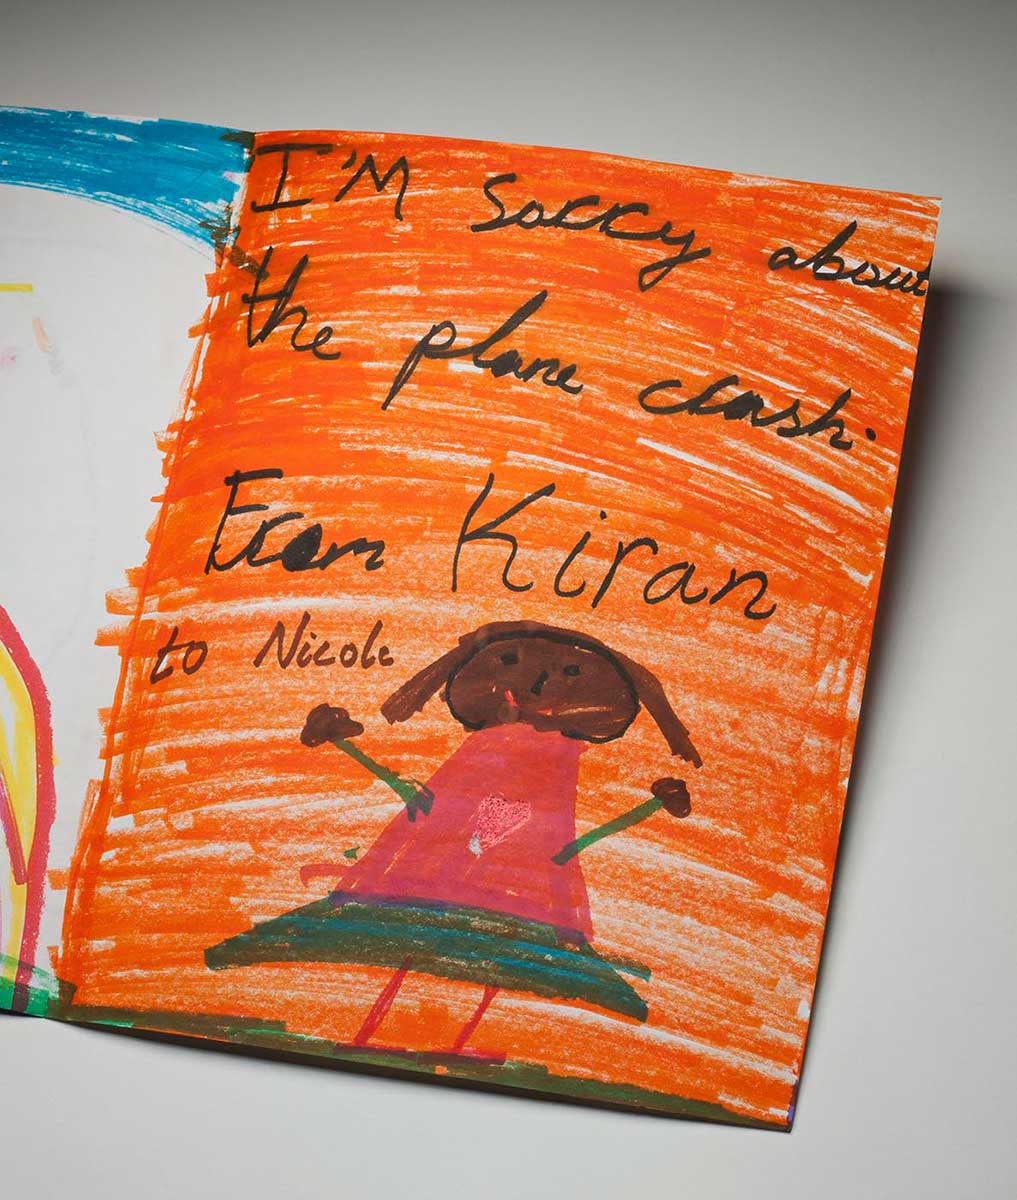 A handmade card showing the right inside view. The background is coloured in orange texta, with the handwritten words 'I'm sorry about the plane crash. From Kiran to Nicole' at top. There is a picture of a girl at the bottom of the card. She wears a pink top with a central heart motif, and a green skirt. She is smiling and her arms are stretched open. - click to view larger image